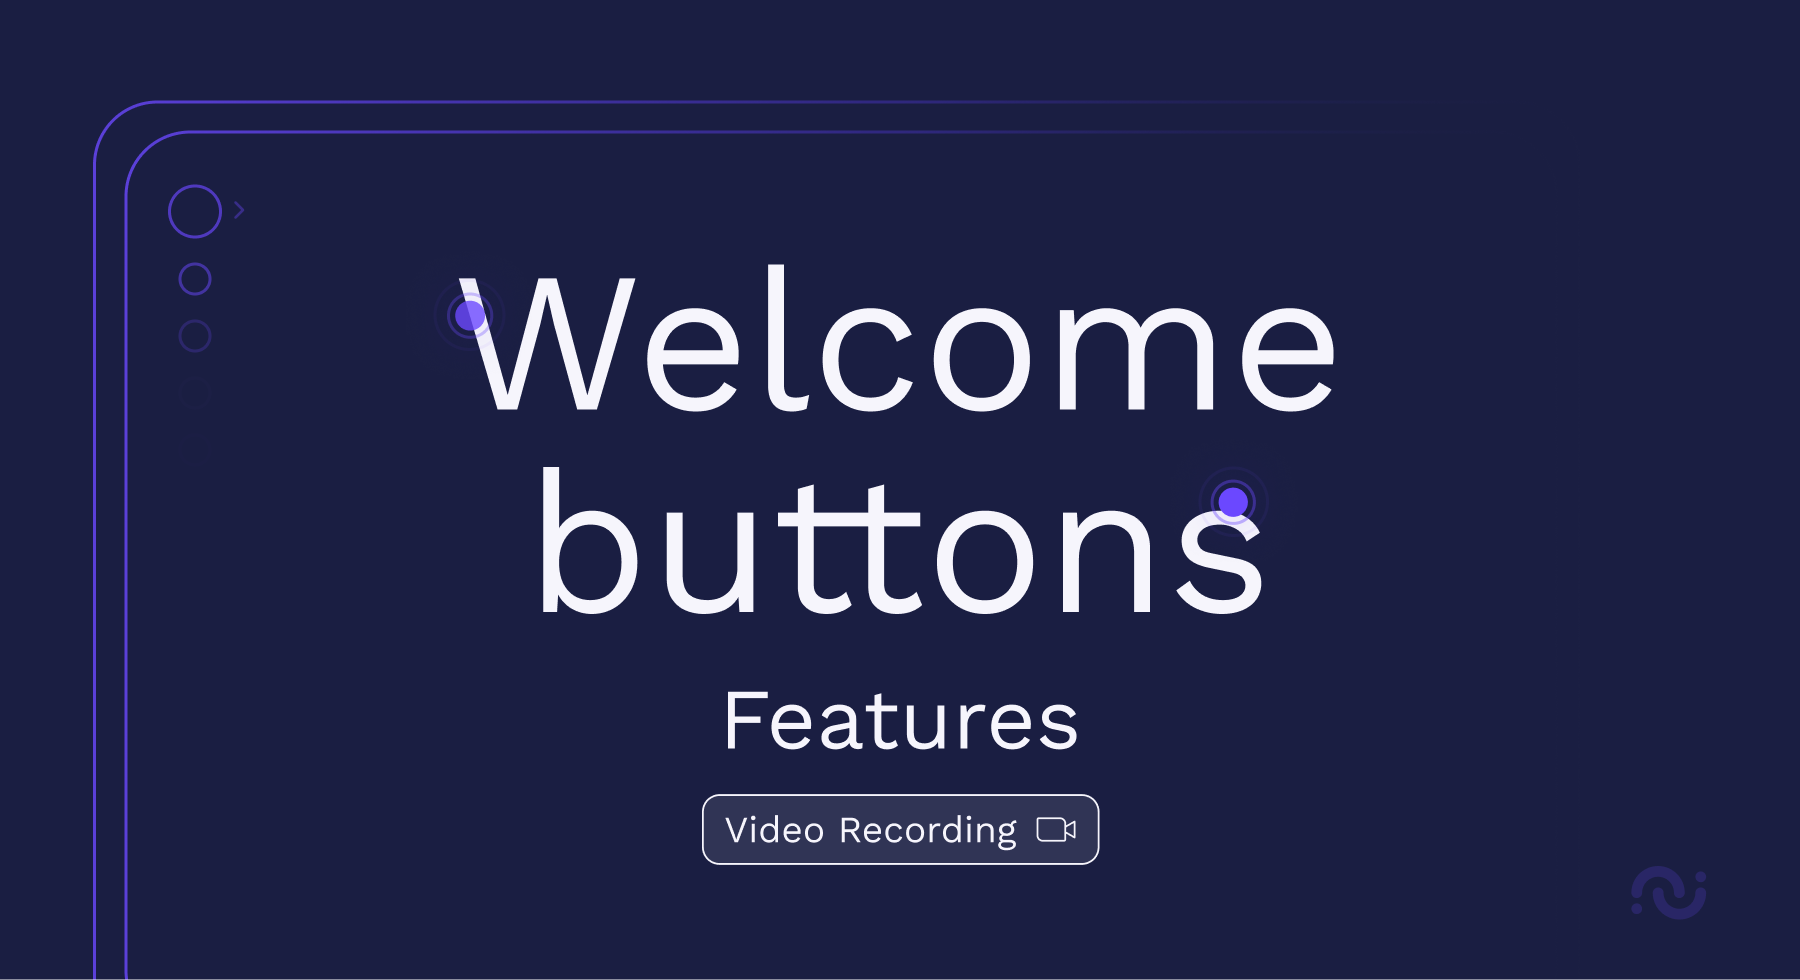 Welcome buttons